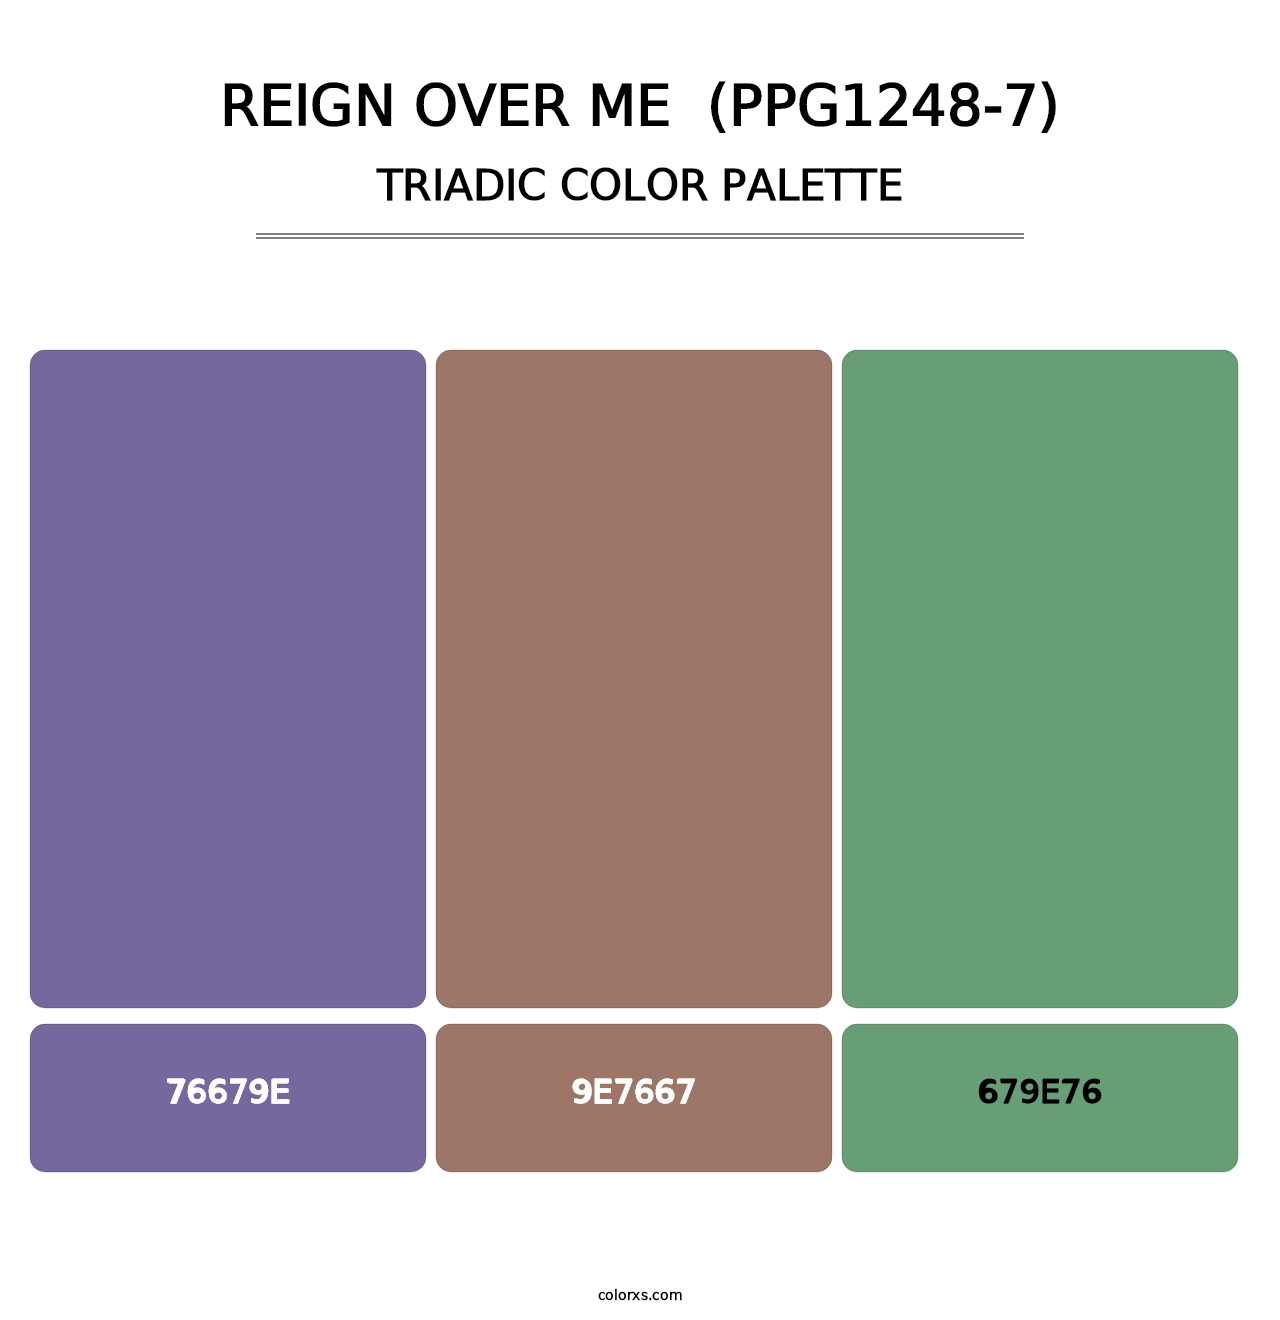 Reign Over Me  (PPG1248-7) - Triadic Color Palette